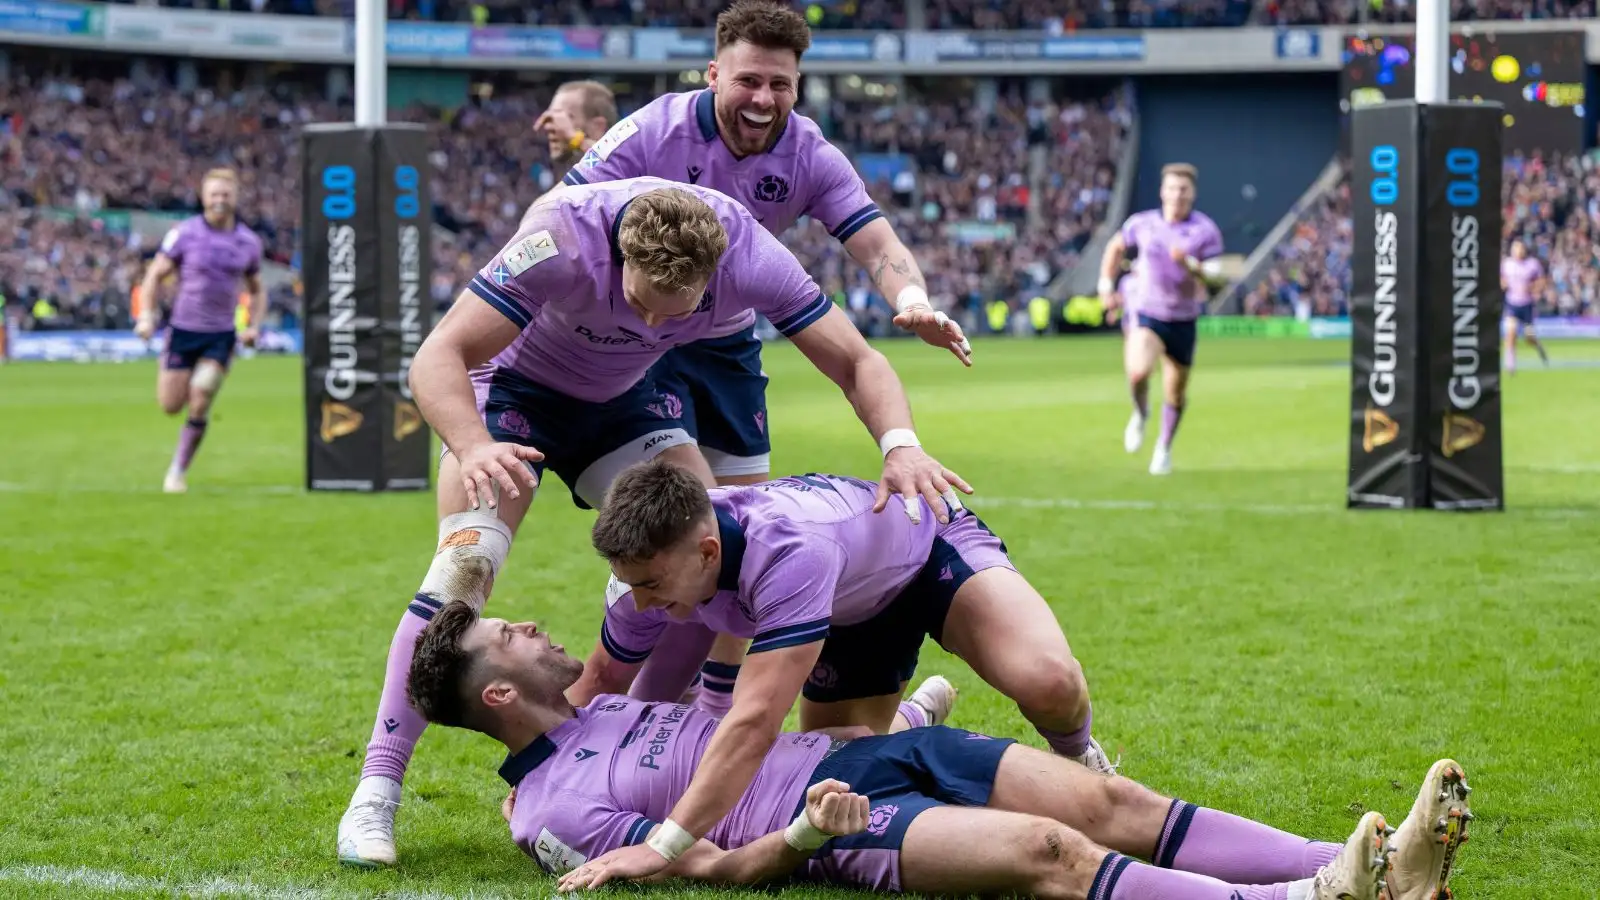 watch Scotland rounded off their 26-14 Six Nations victory over Italy with a stunning long-range try rounded off by Blair Kinghorn after a controversial call.